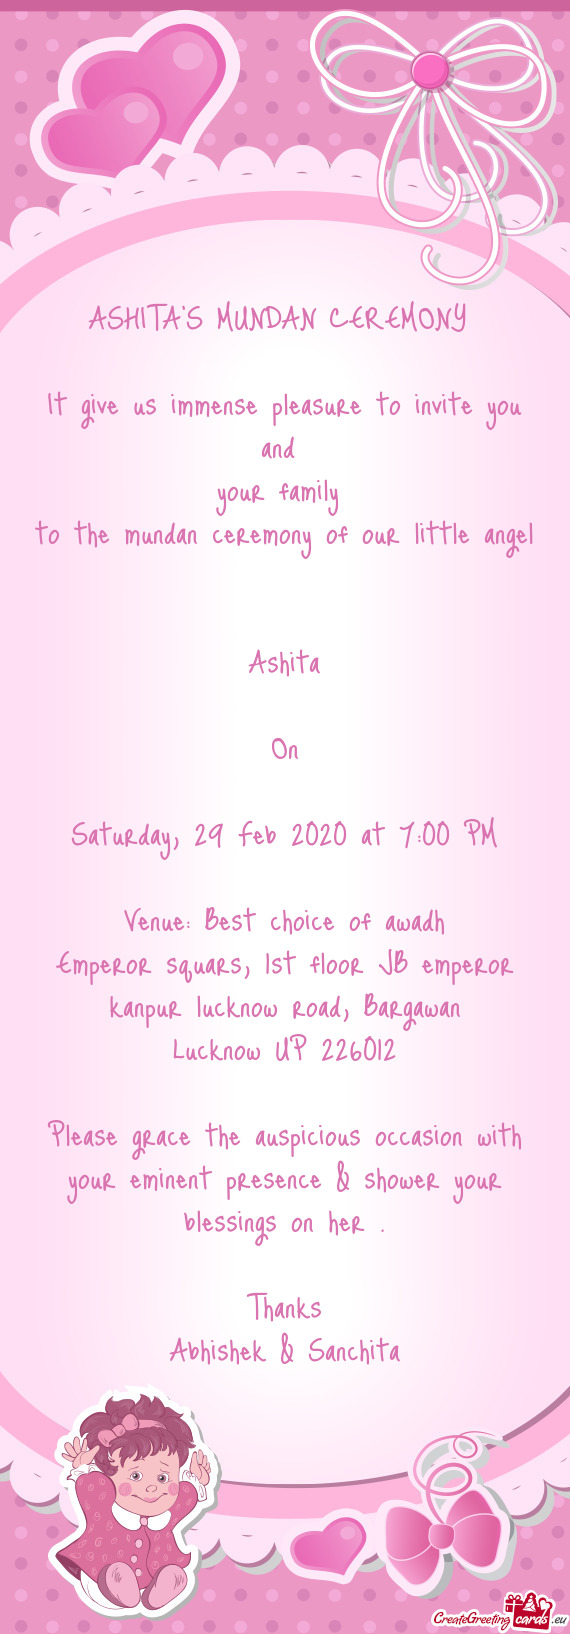 To the mundan ceremony of our little angel